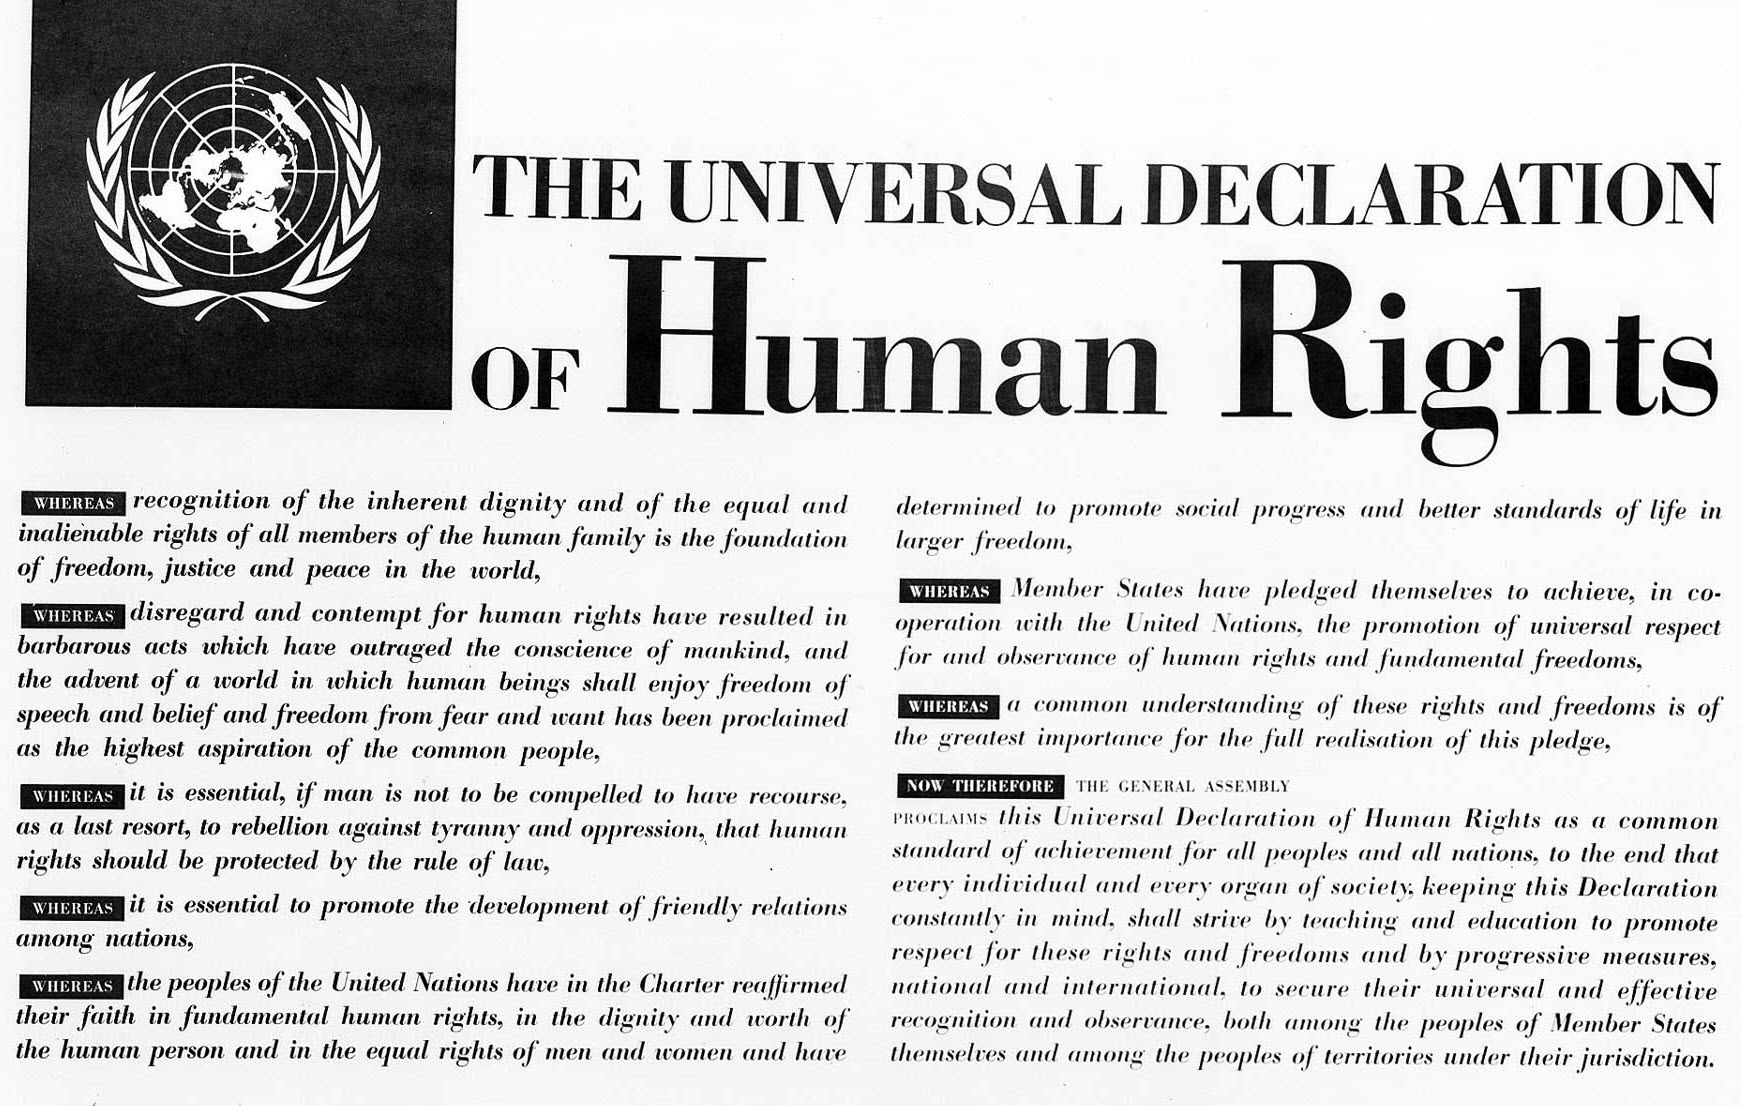 The universal declaration of human rights 10 December 1948